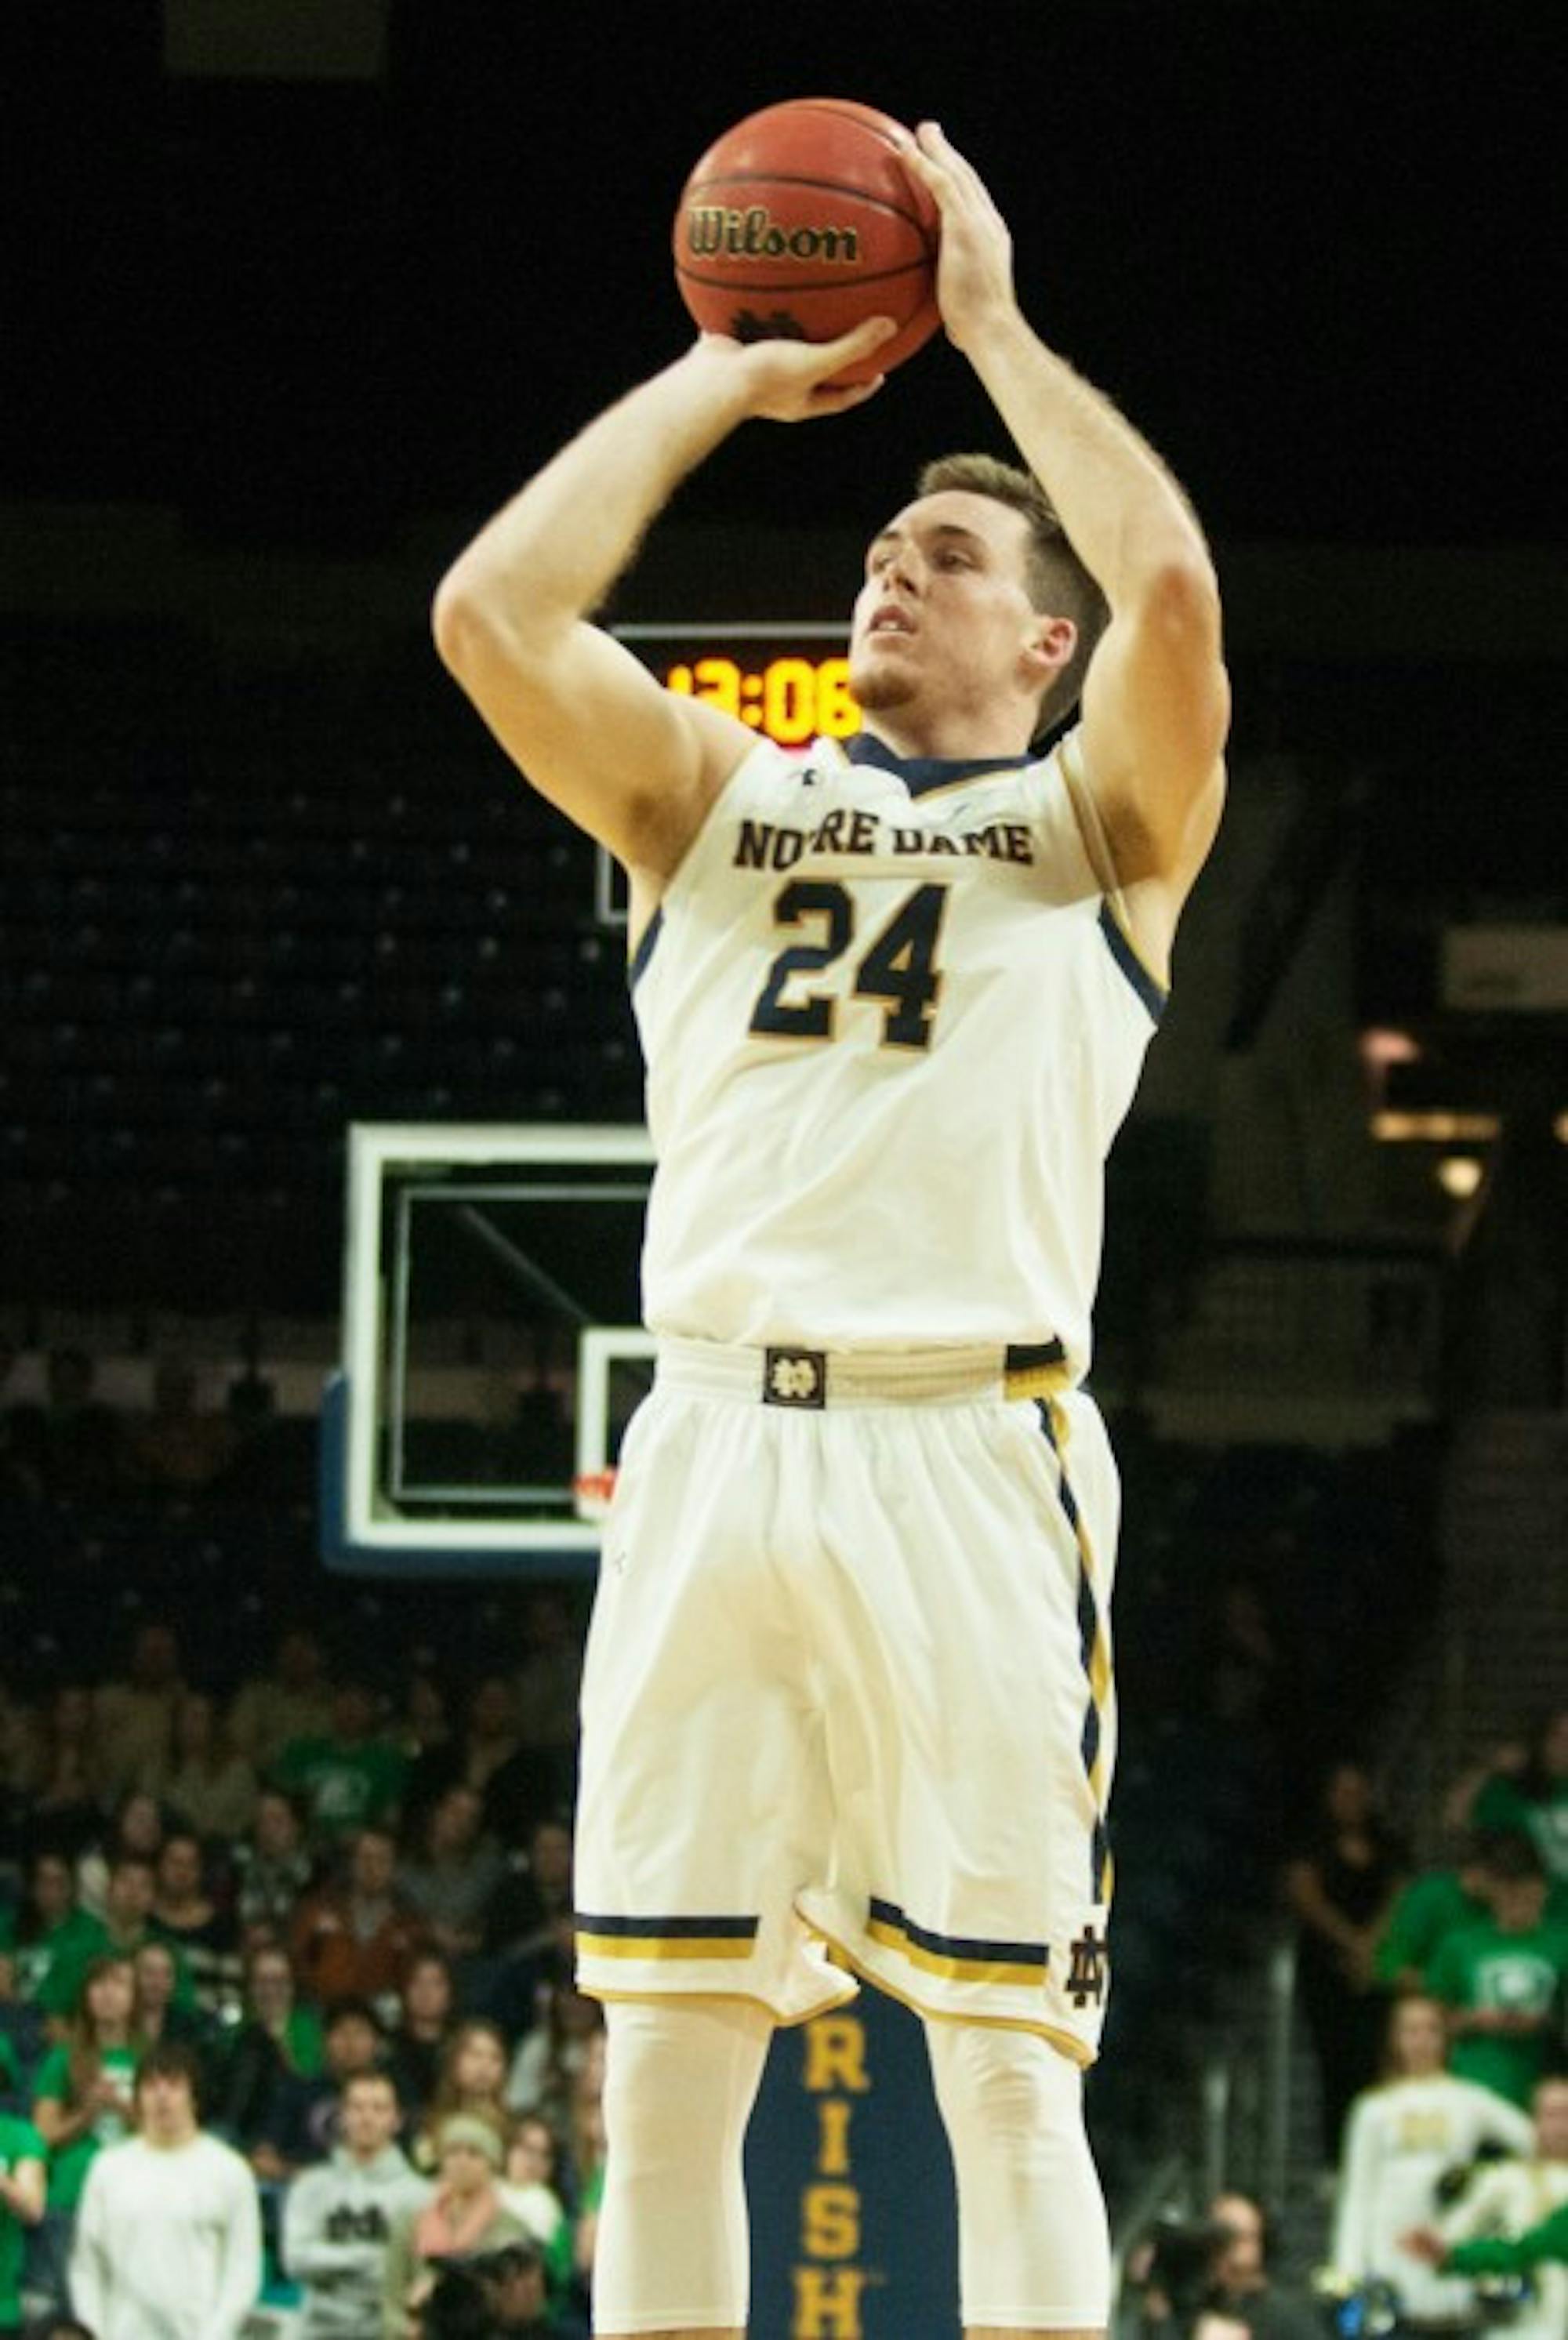 Irish senior guard/forward Pat Connaughton takes a jump shot during Notre Dame’s 75-57 win over Farleigh Dickinson at Purcell Pavilion on Saturday night. Connaughton led all scorers with 19 points Saturday, shooting 8-of-13 from the field.